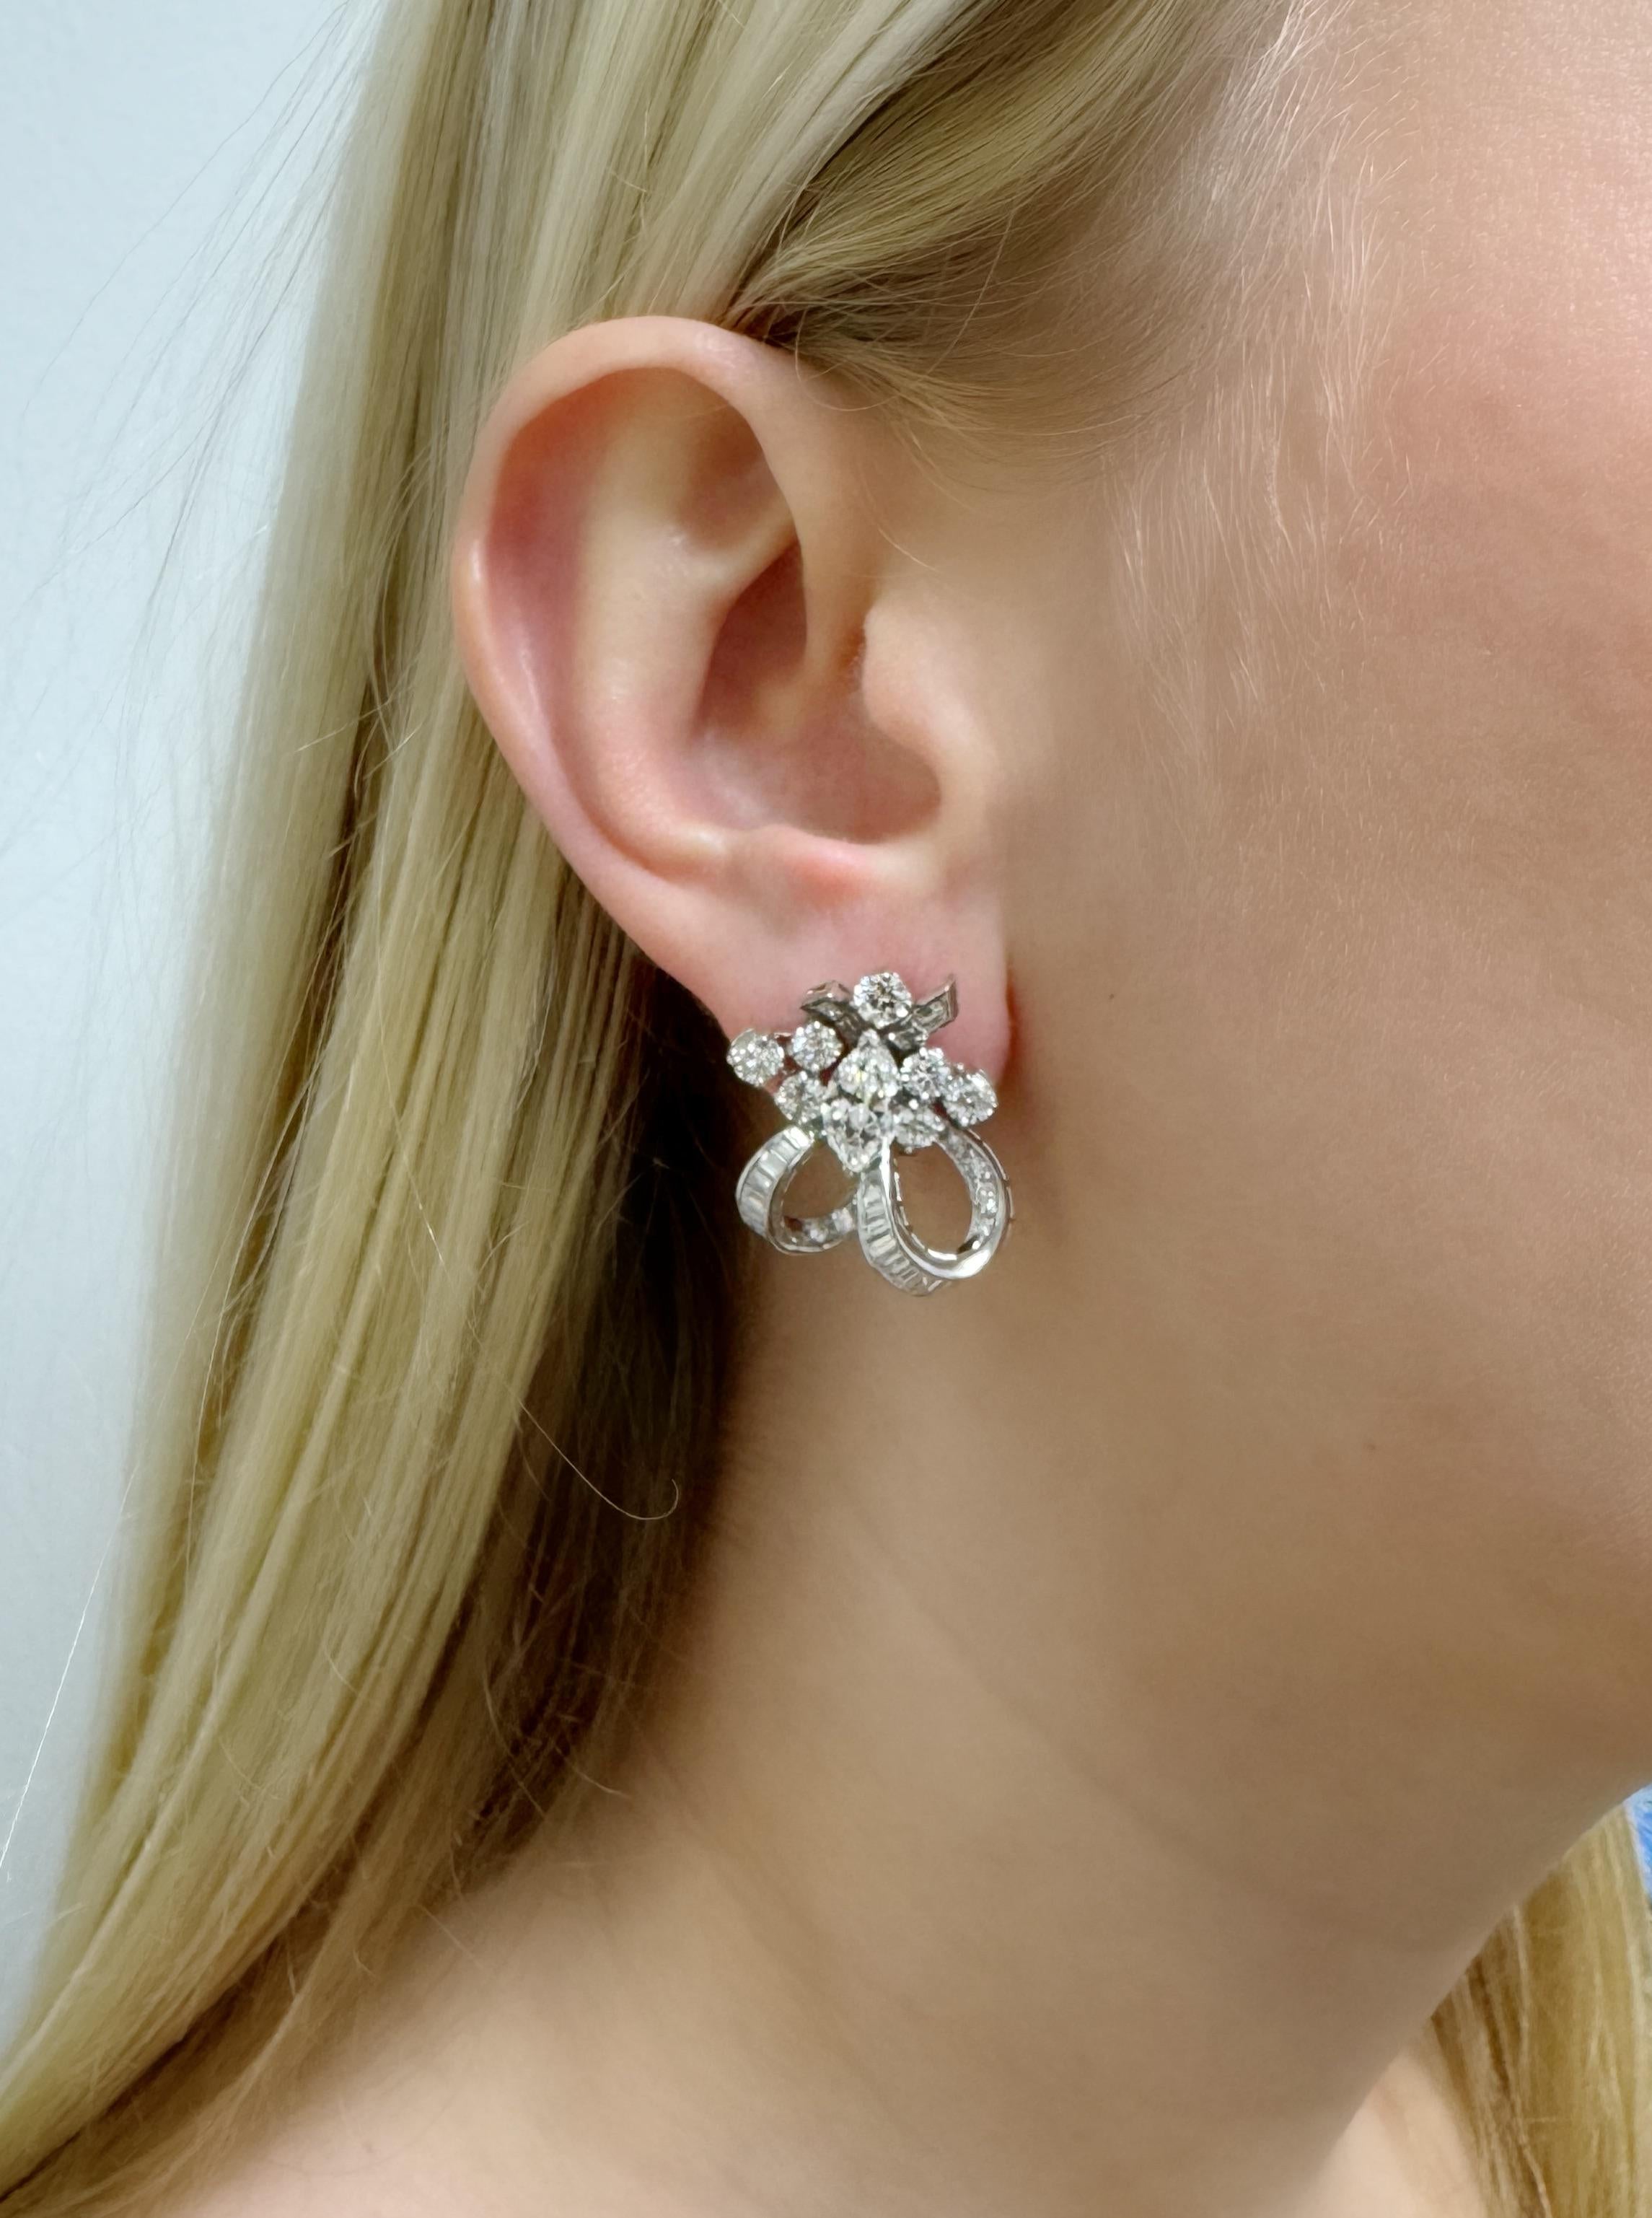 These beautifully crafted earrings contain two marquise cut diamonds weighing approximately 1.95 carats total surrounded by 80 round brilliant cut diamonds and baguette cut diamonds weighing approximately 4.00 carats total, in a looping tie design.